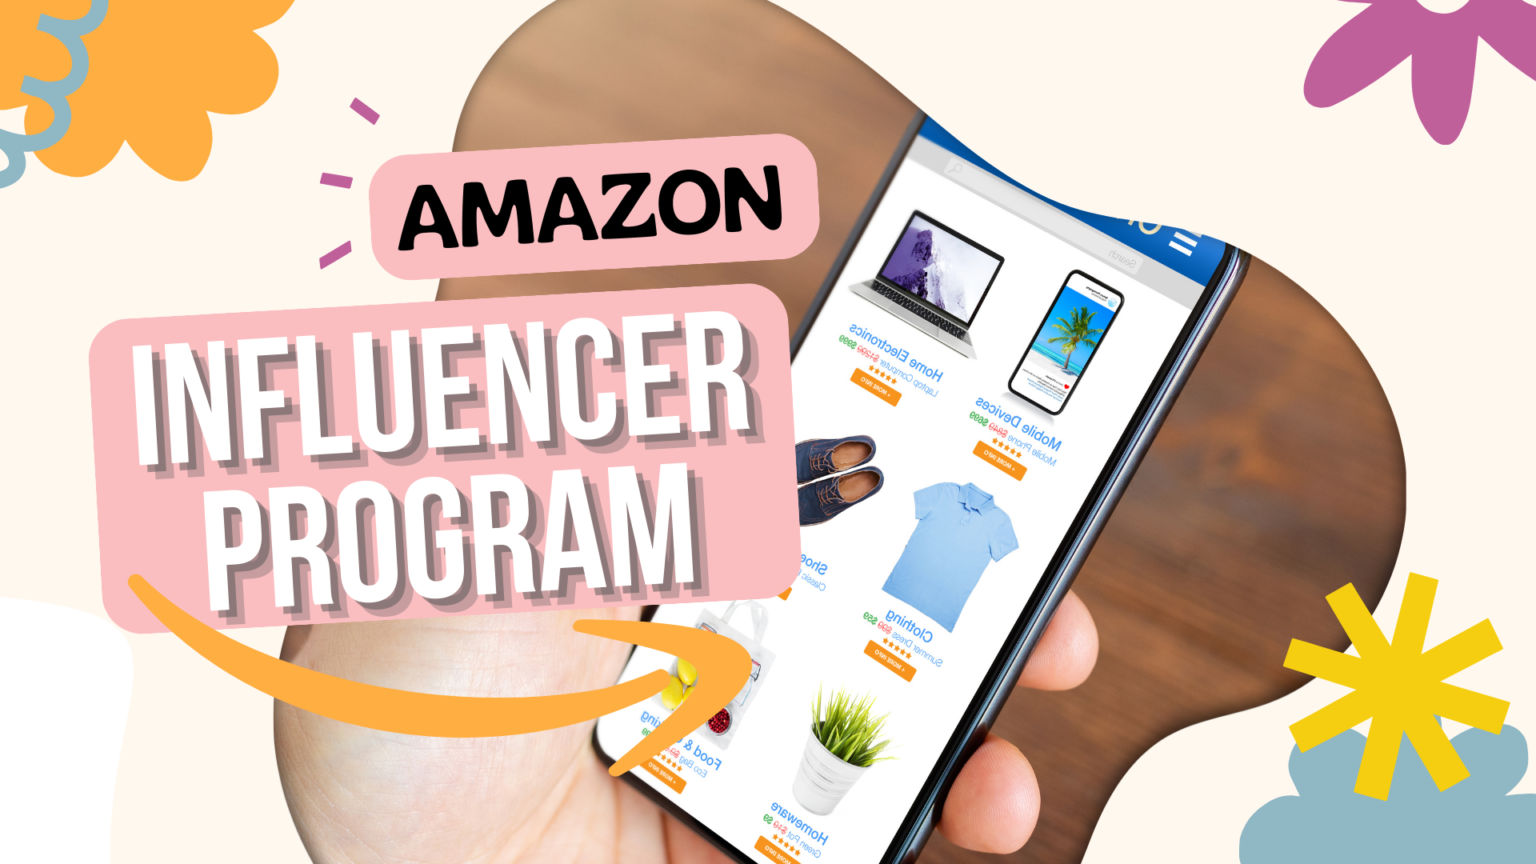 Amazon-infuencer-program-make-money-online-on-site-commissions-1536x864.png